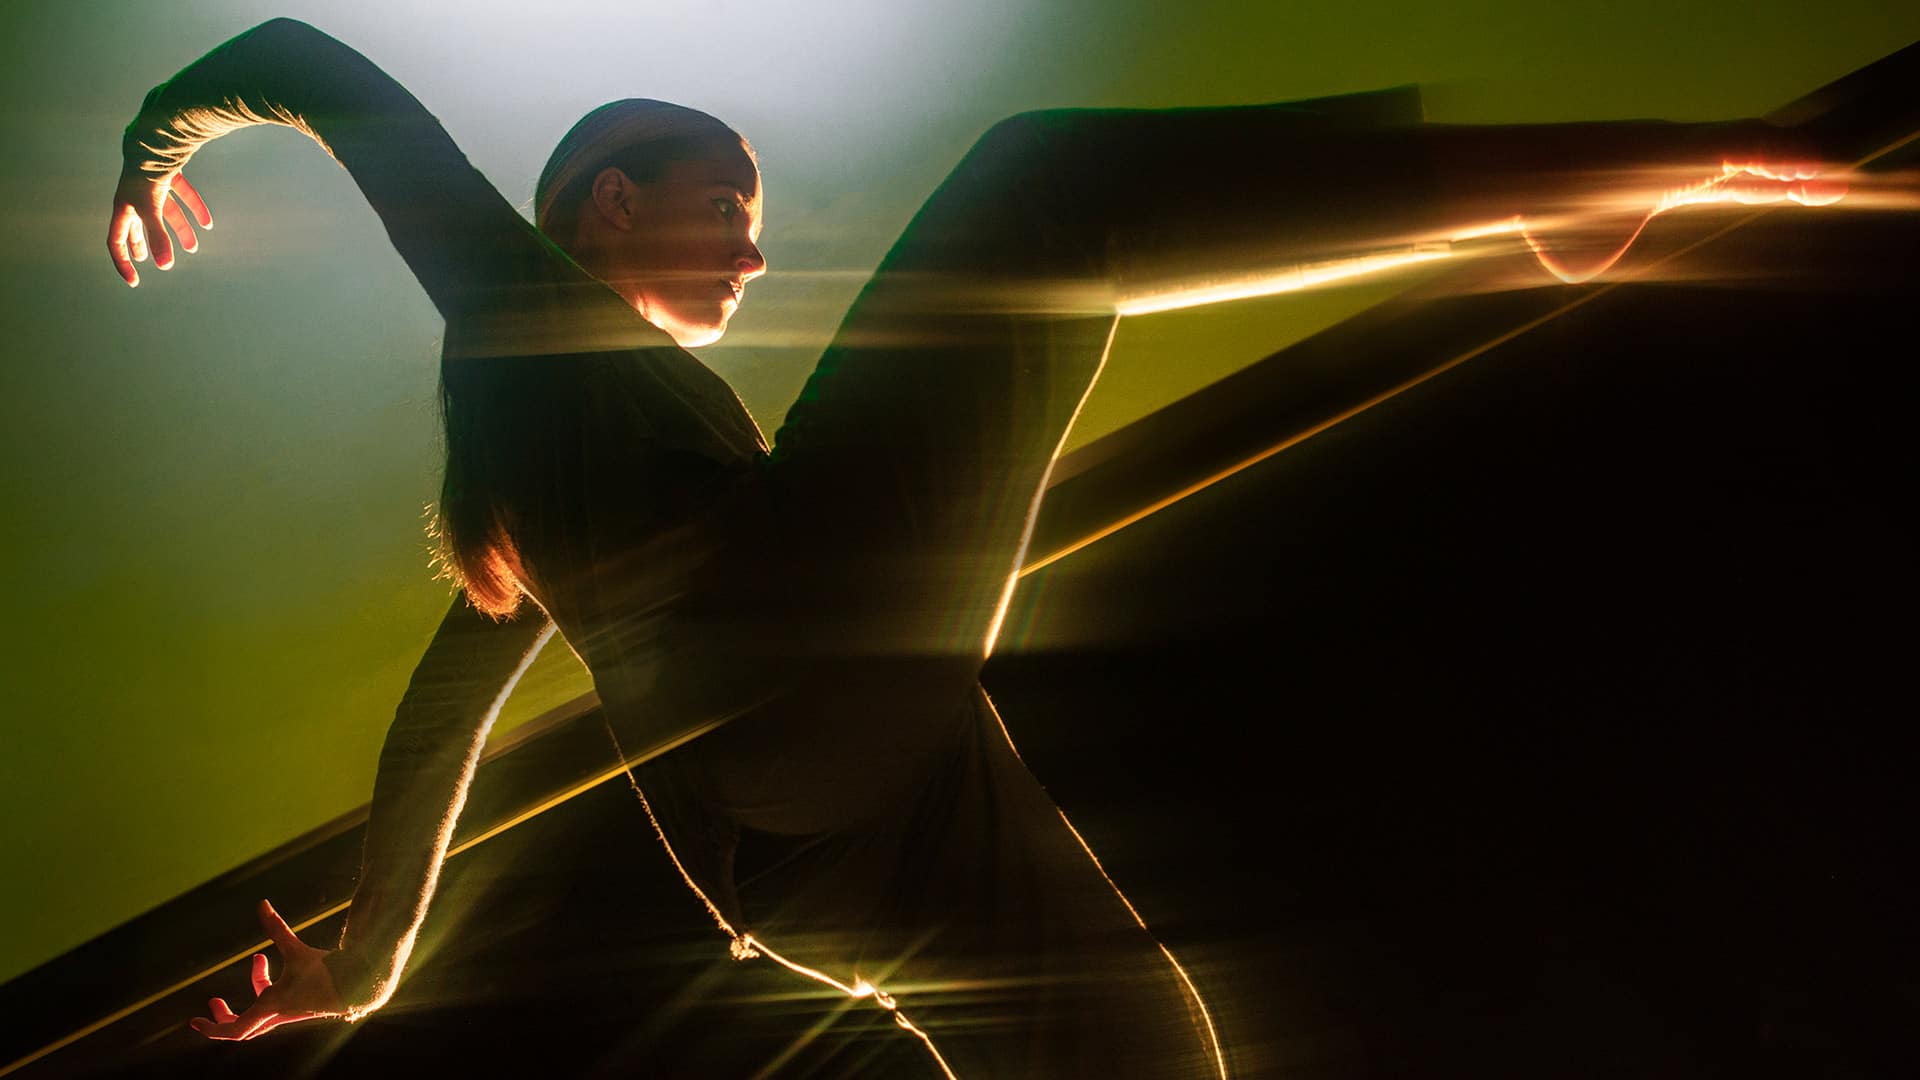 Strong contemporary dance image of Richard Chappell Dance, playing with light and movement